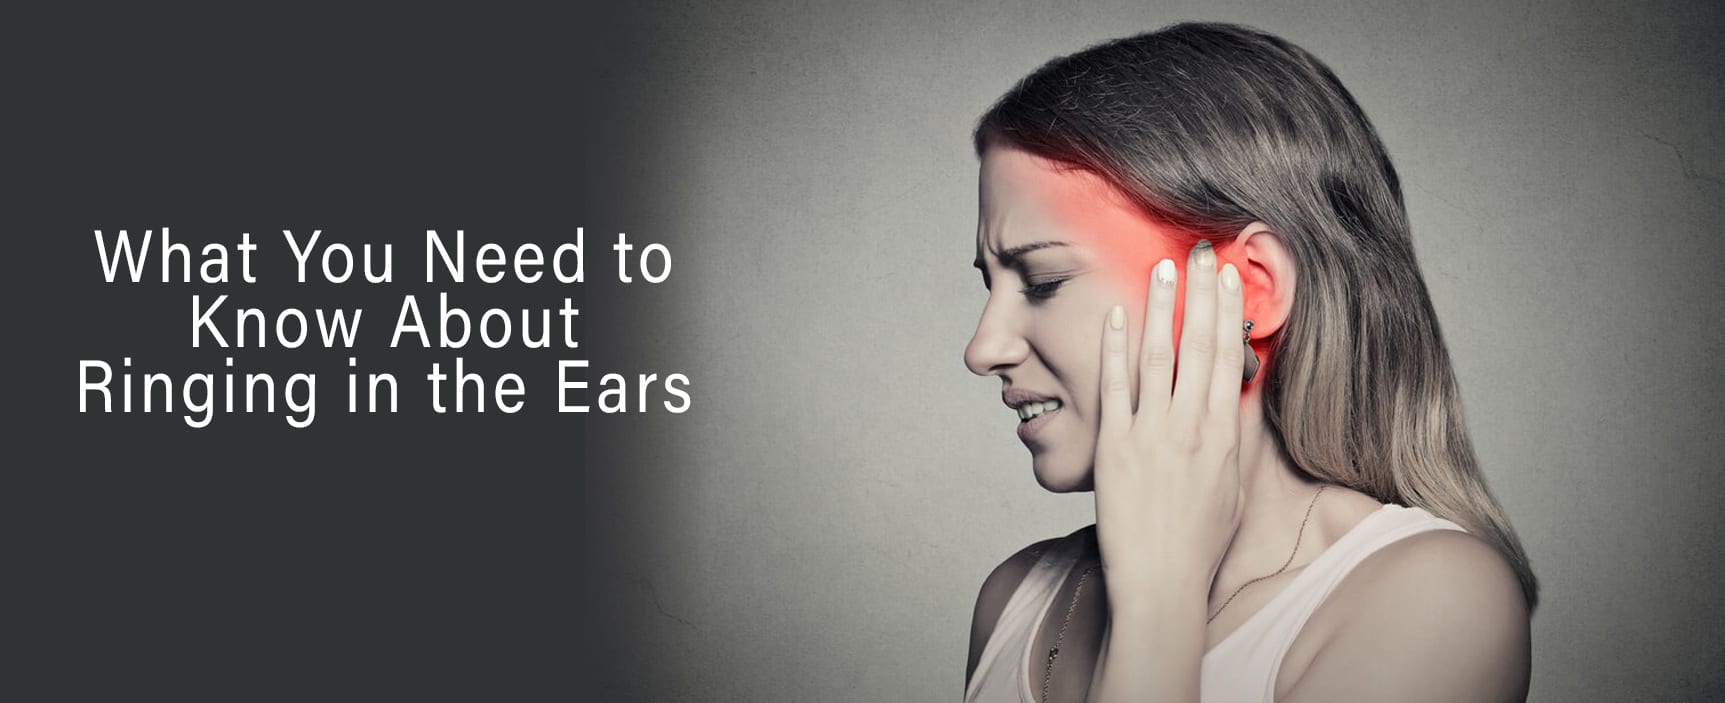 What you need to know about ringing in the ears